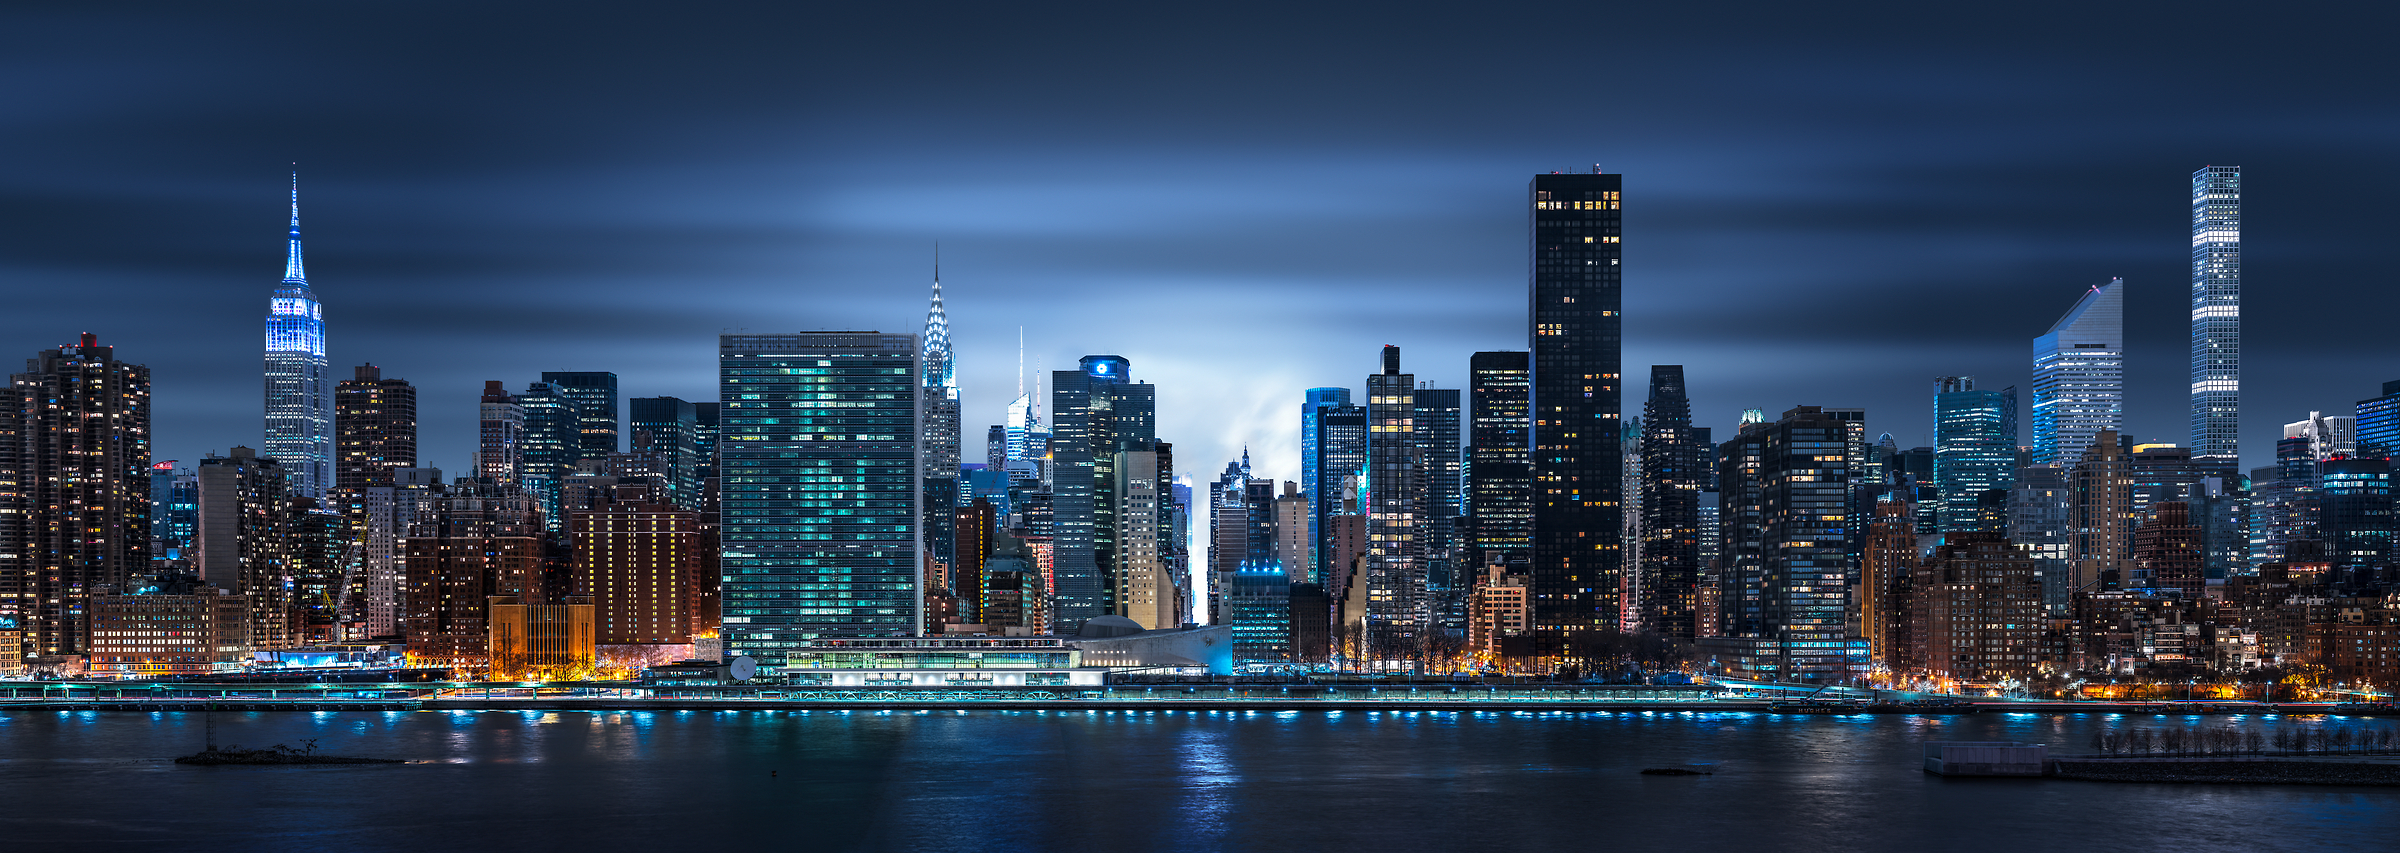 4,122 megapixels! A very high resolution, large-format VAST photo print of the NYC skyline at night with the East River; cityscape photo created by Dan Piech